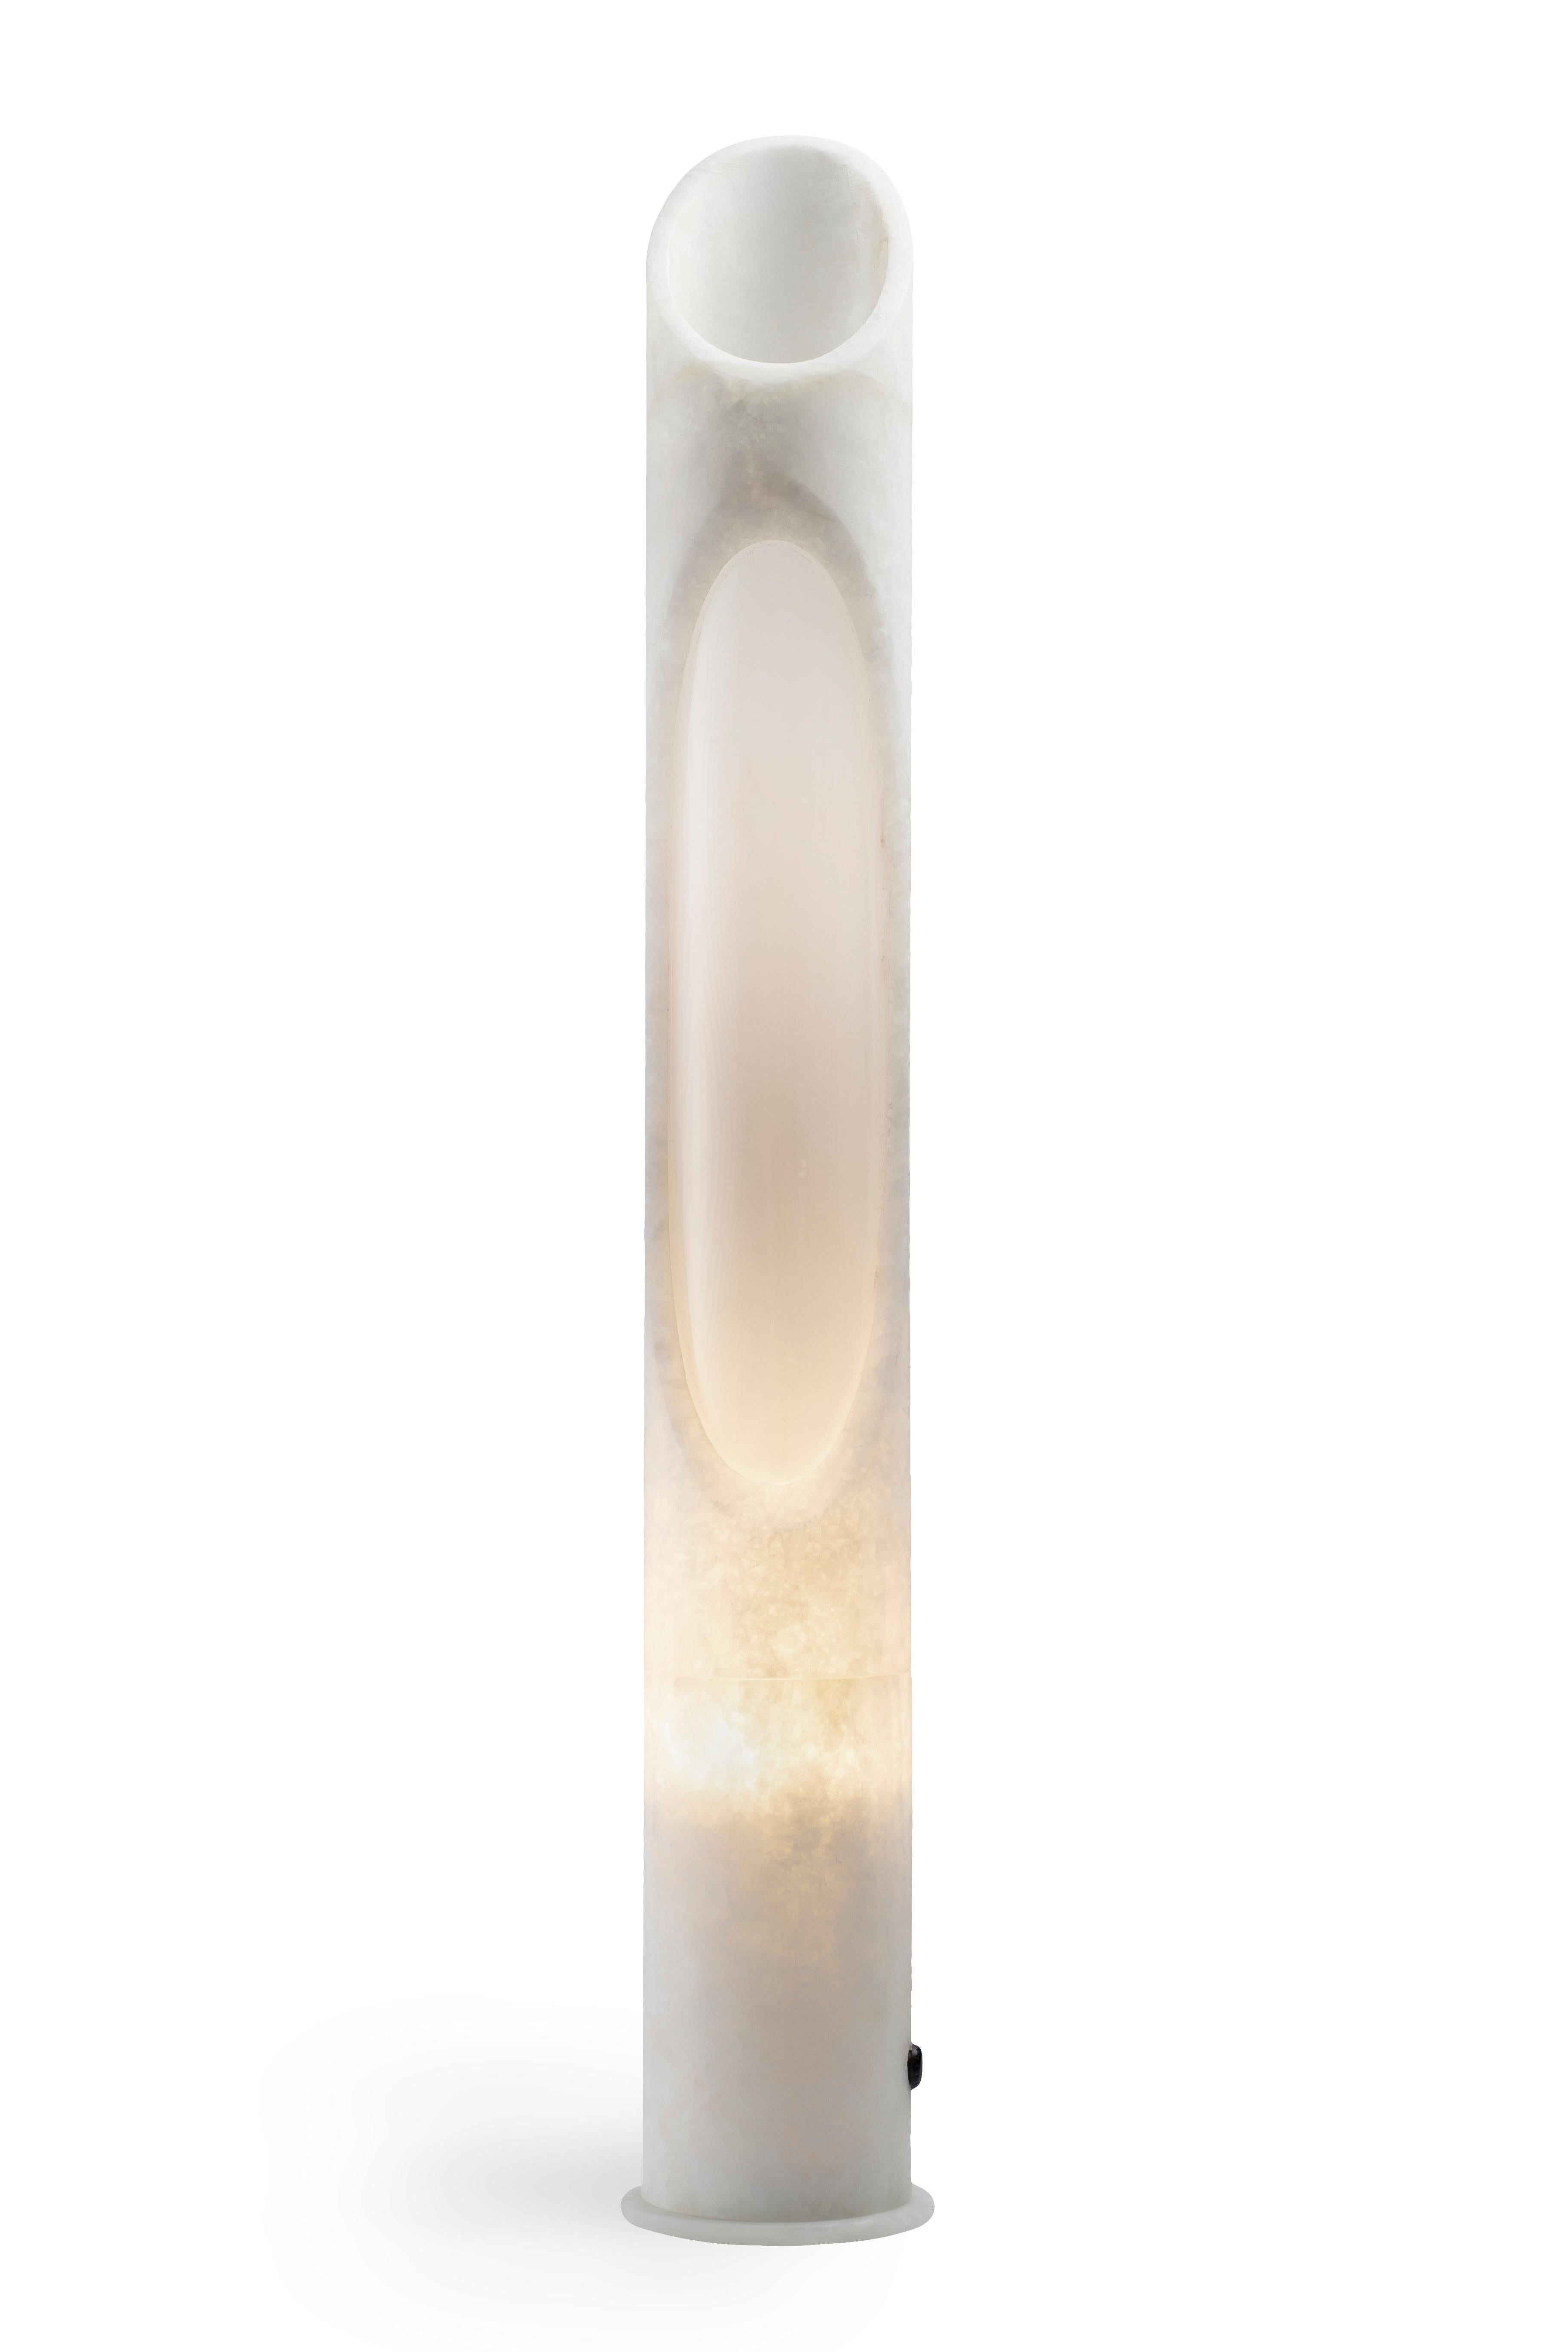 Lamp L in White Onyx marble, designed by Jacopo Simonetti.
Available also in Pink Egeo, White Arabescato, Black Marquinia marble and in the S version. 

Armonia Collection: Inspired by the captivating image that two contrasting elements can